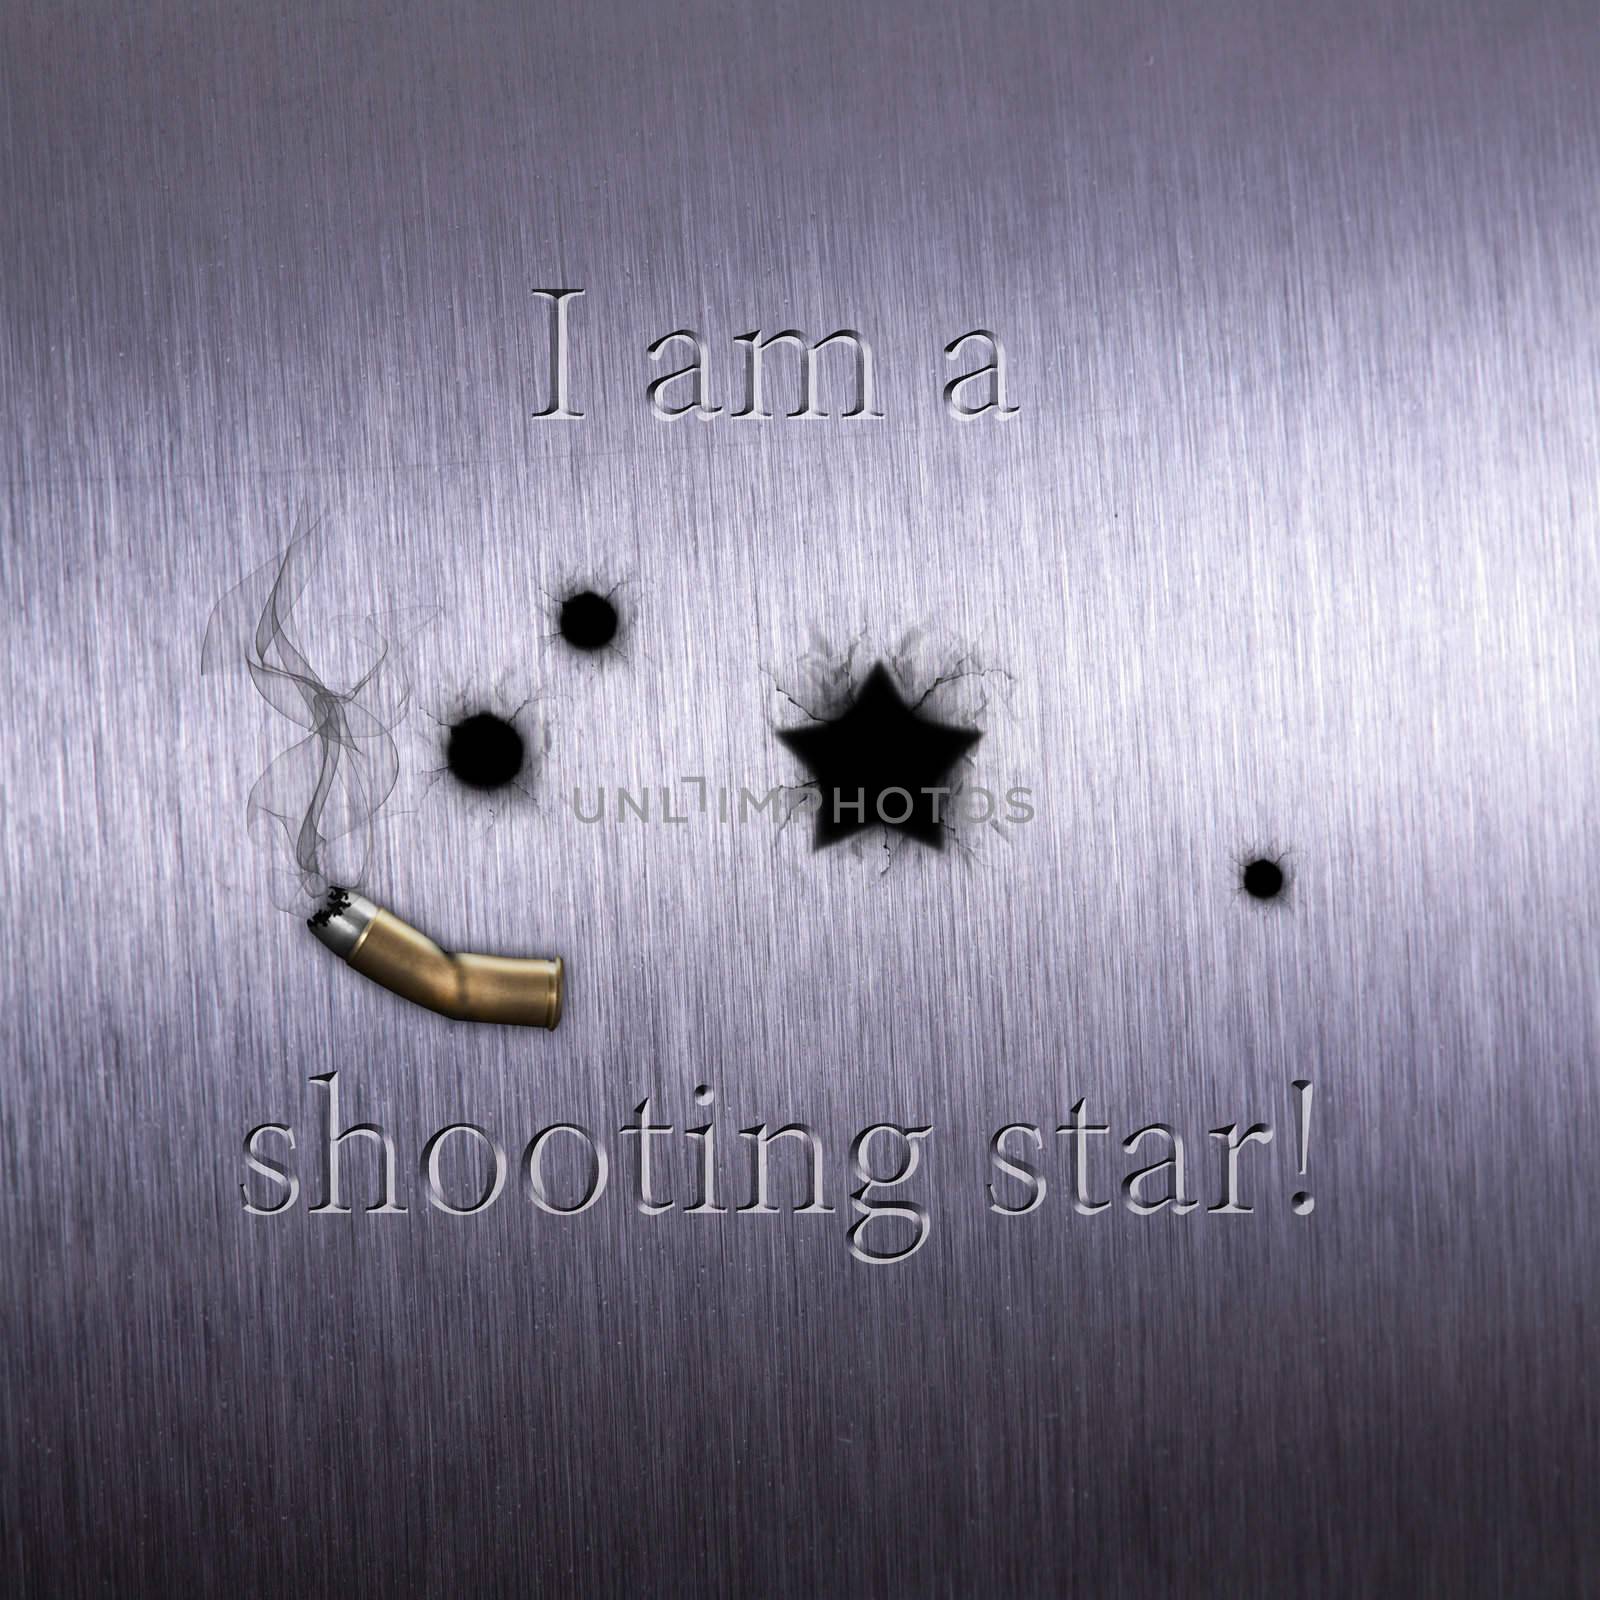 Humorous shot illustration on brushed metal: Bullet holes - one looks like a star - together with a damaged and smoky cartridge case
and the text "I am a shooting star!".